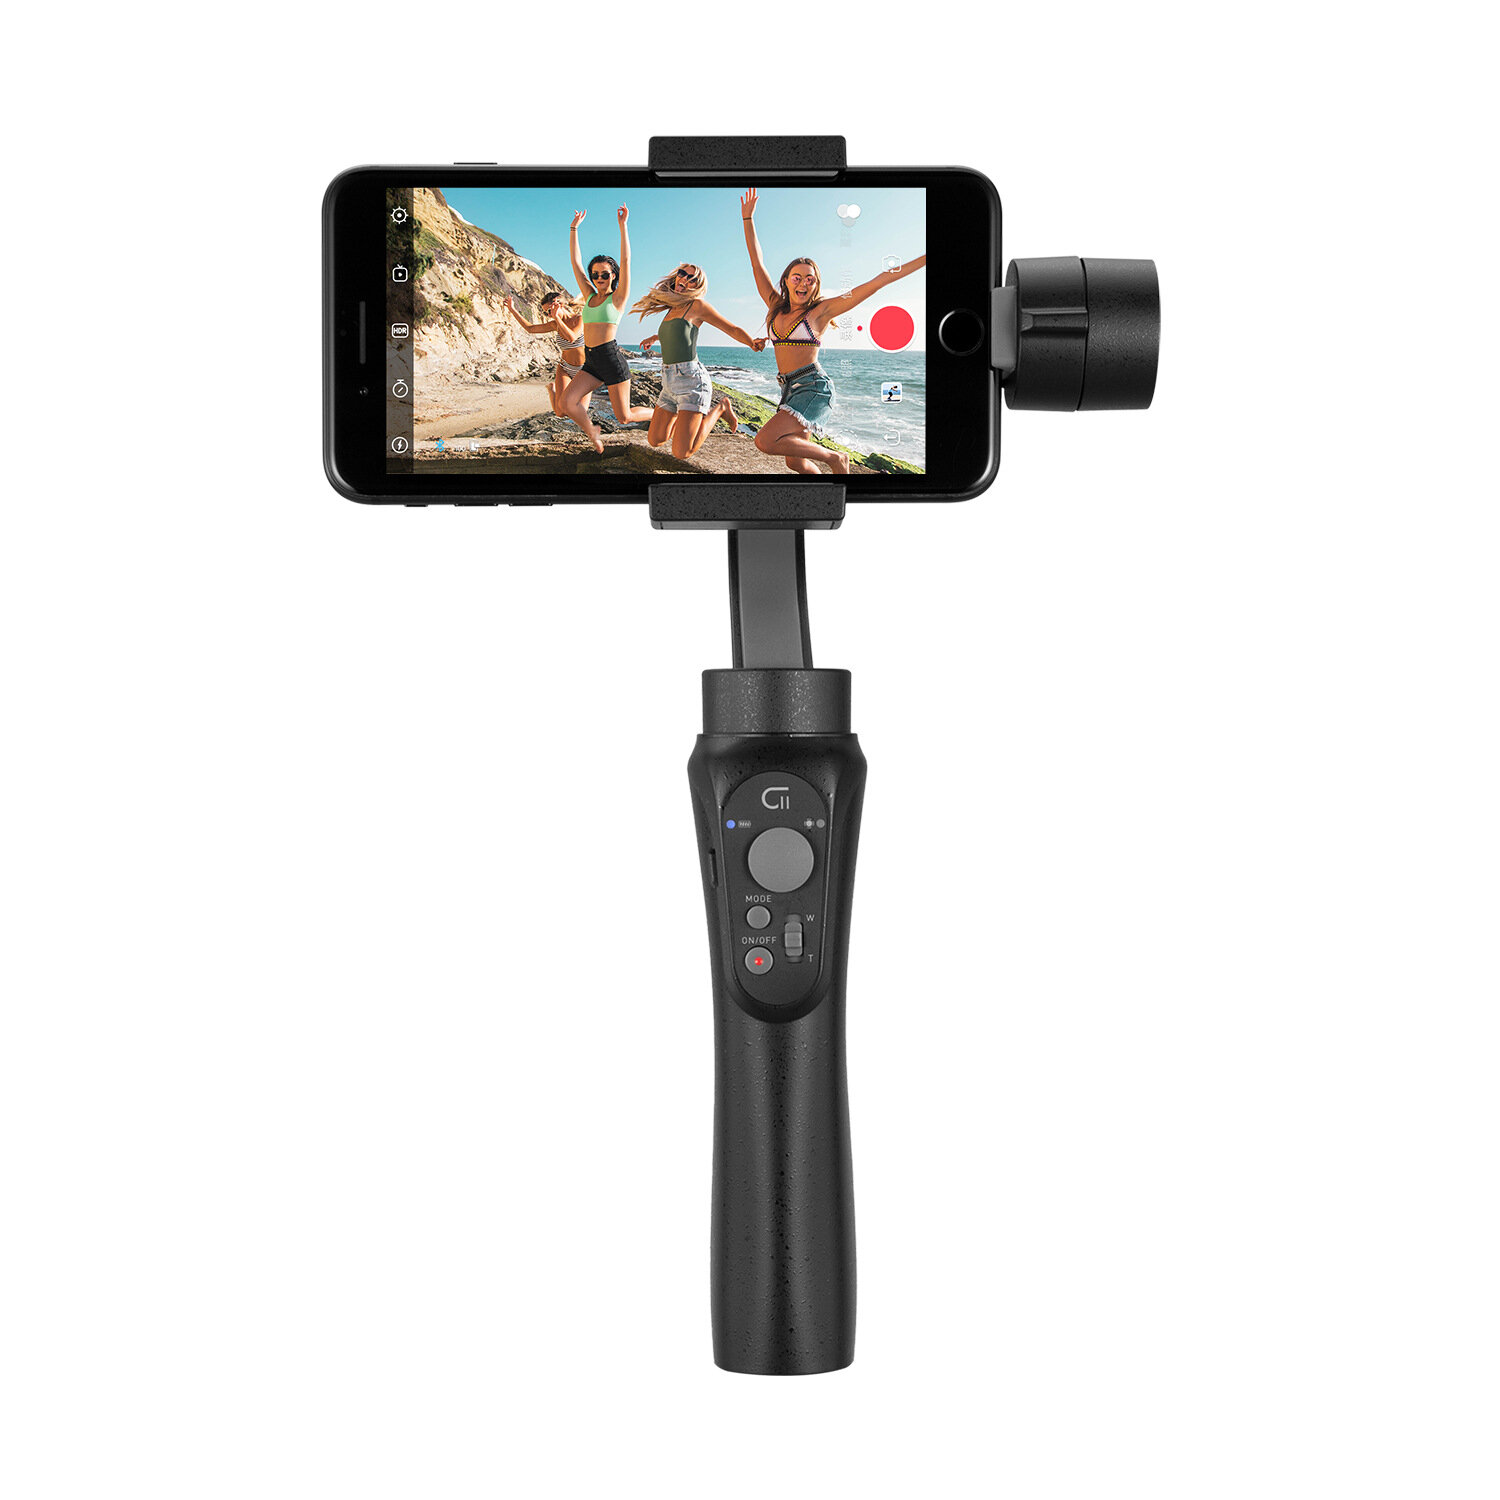 

ZHIYUN CINEPEER C11 3-Axis Vlog Handheld Gimbal Stabilizer With Dolly Zoom Panoranma Mode for Smartphone Action Camera